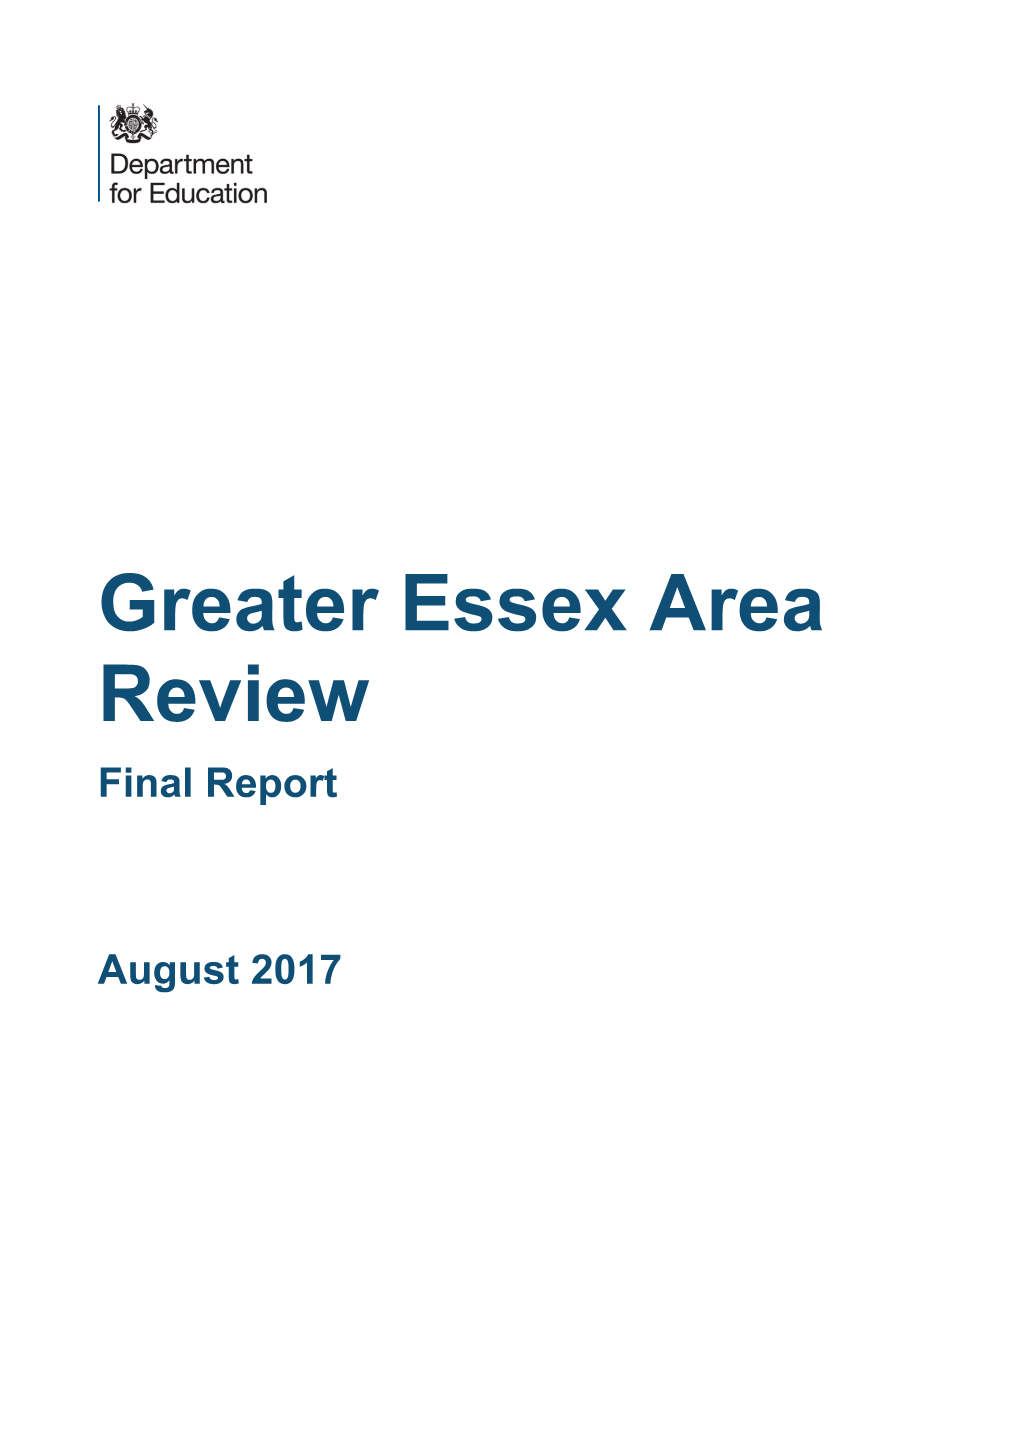 Greater Essex Area Review Final Report